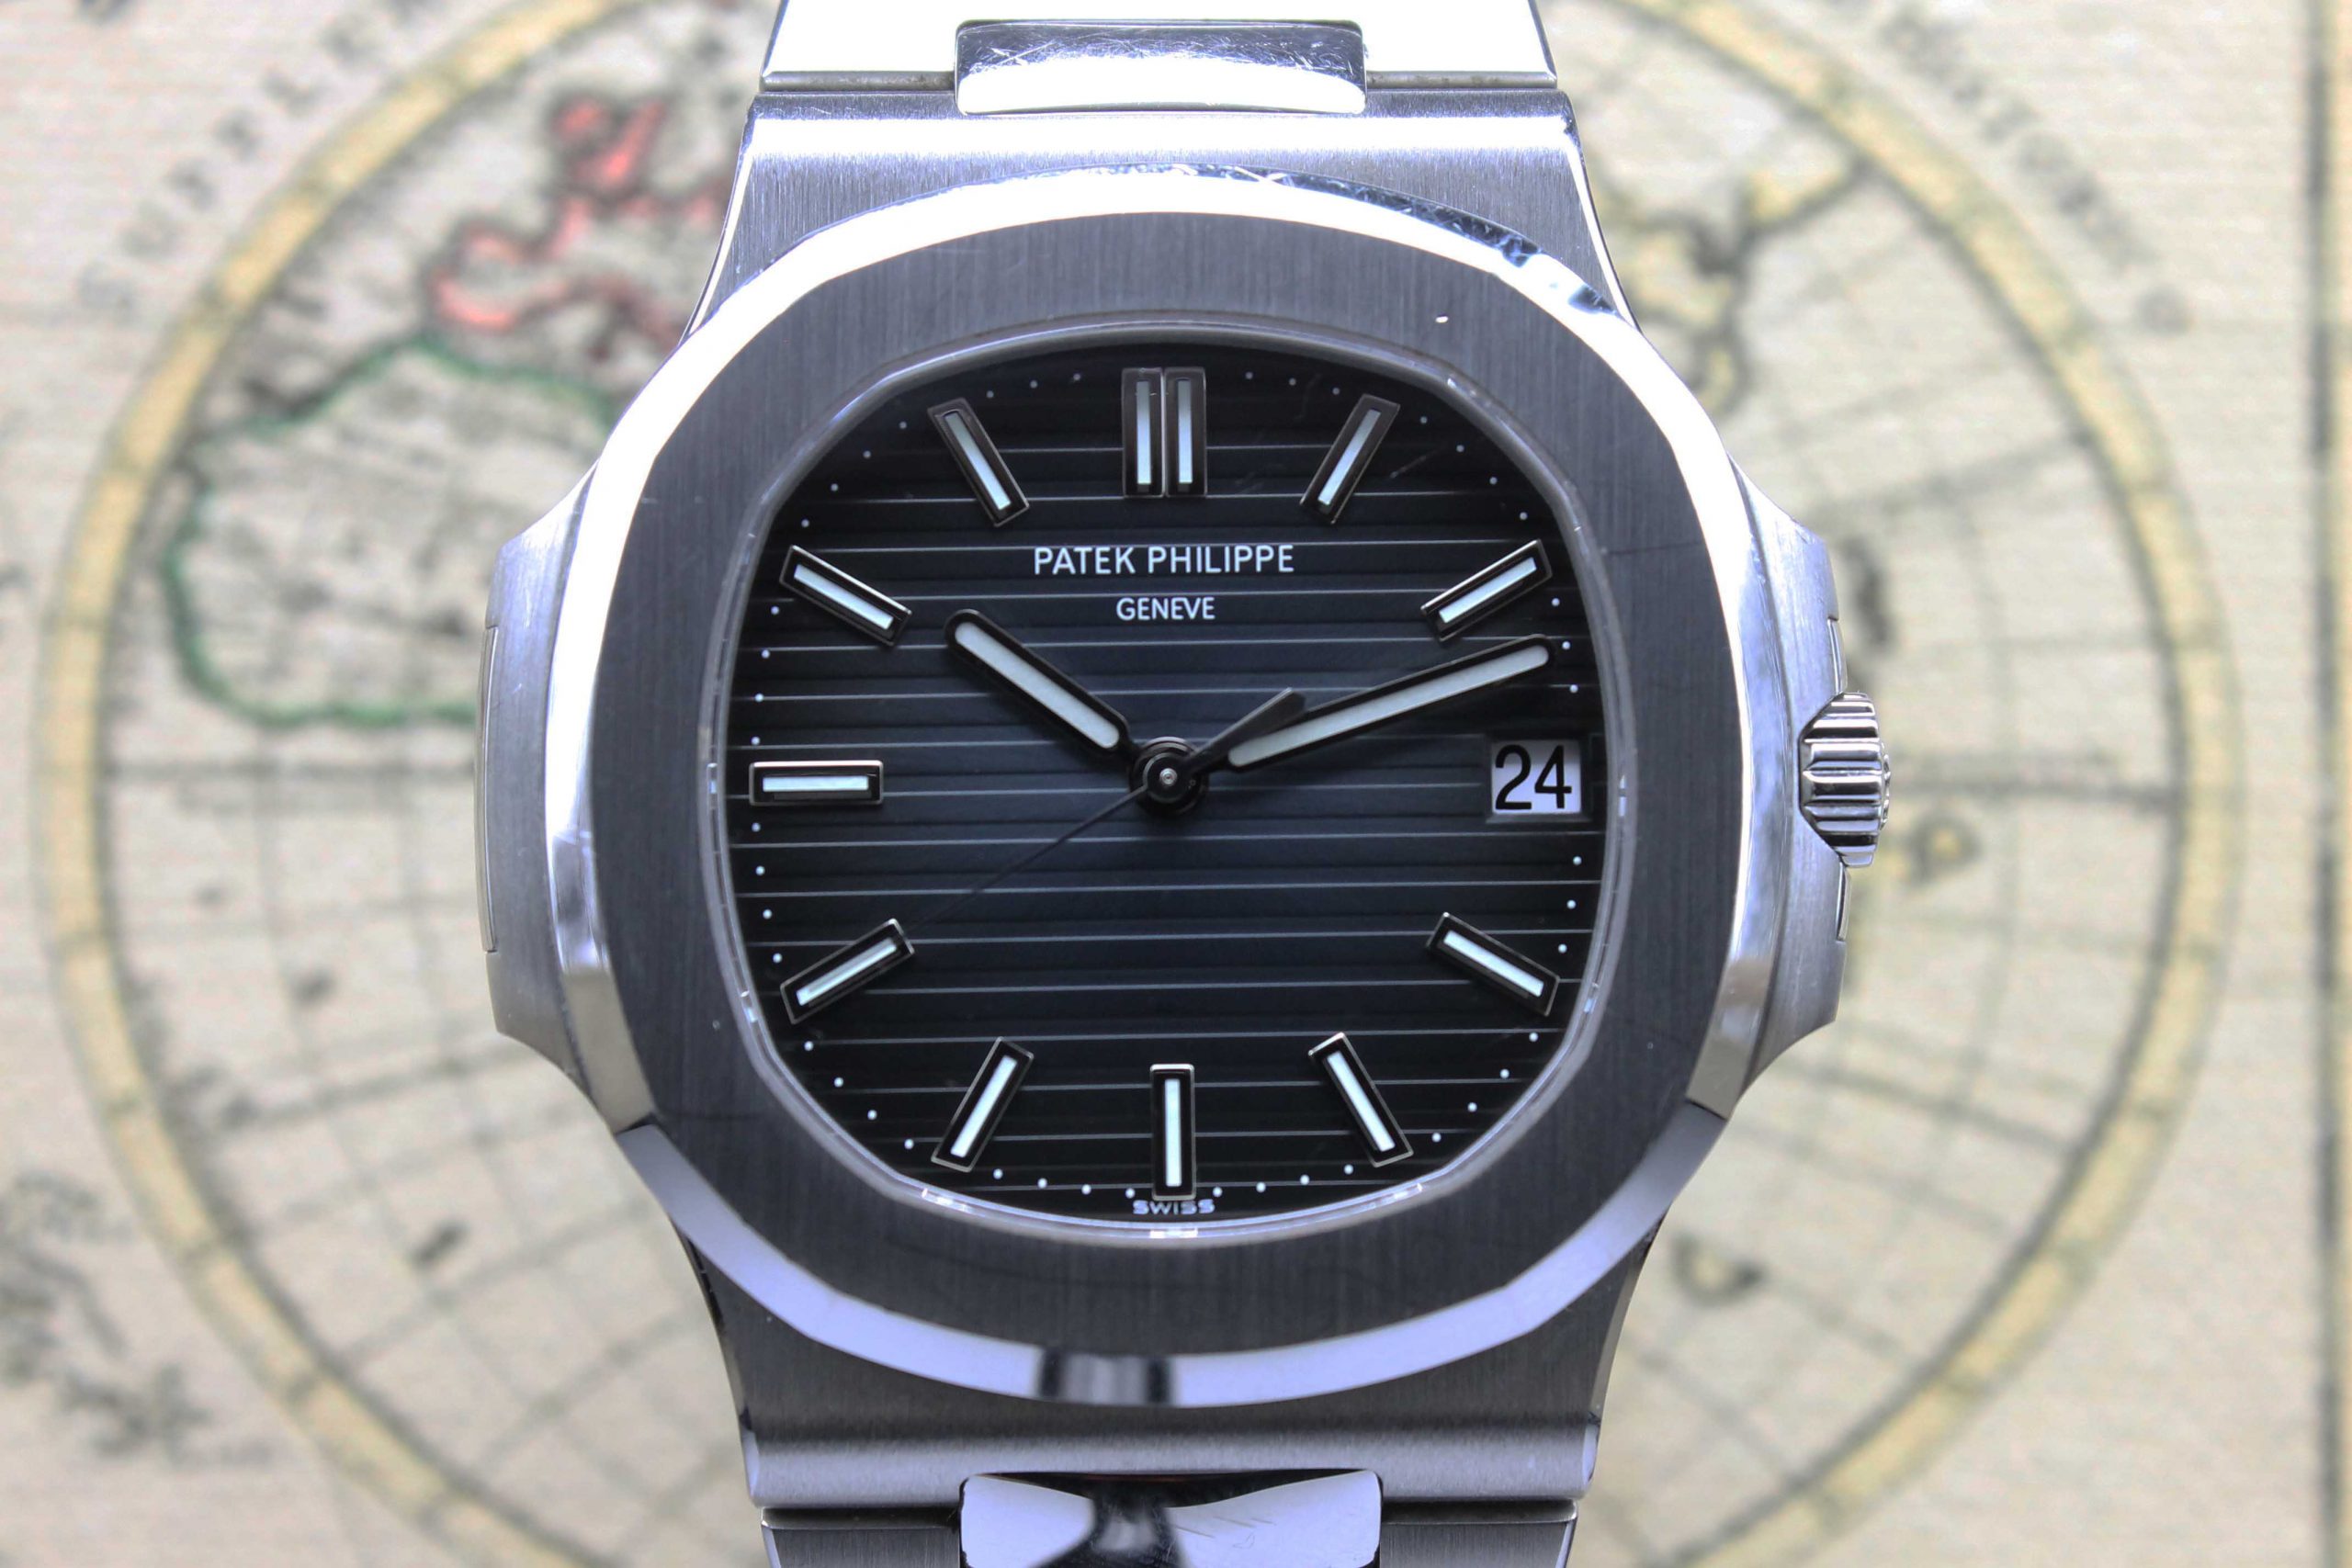 Patek Philippe Nautilus Stainless Steel Blue Dial 5711/1A-010